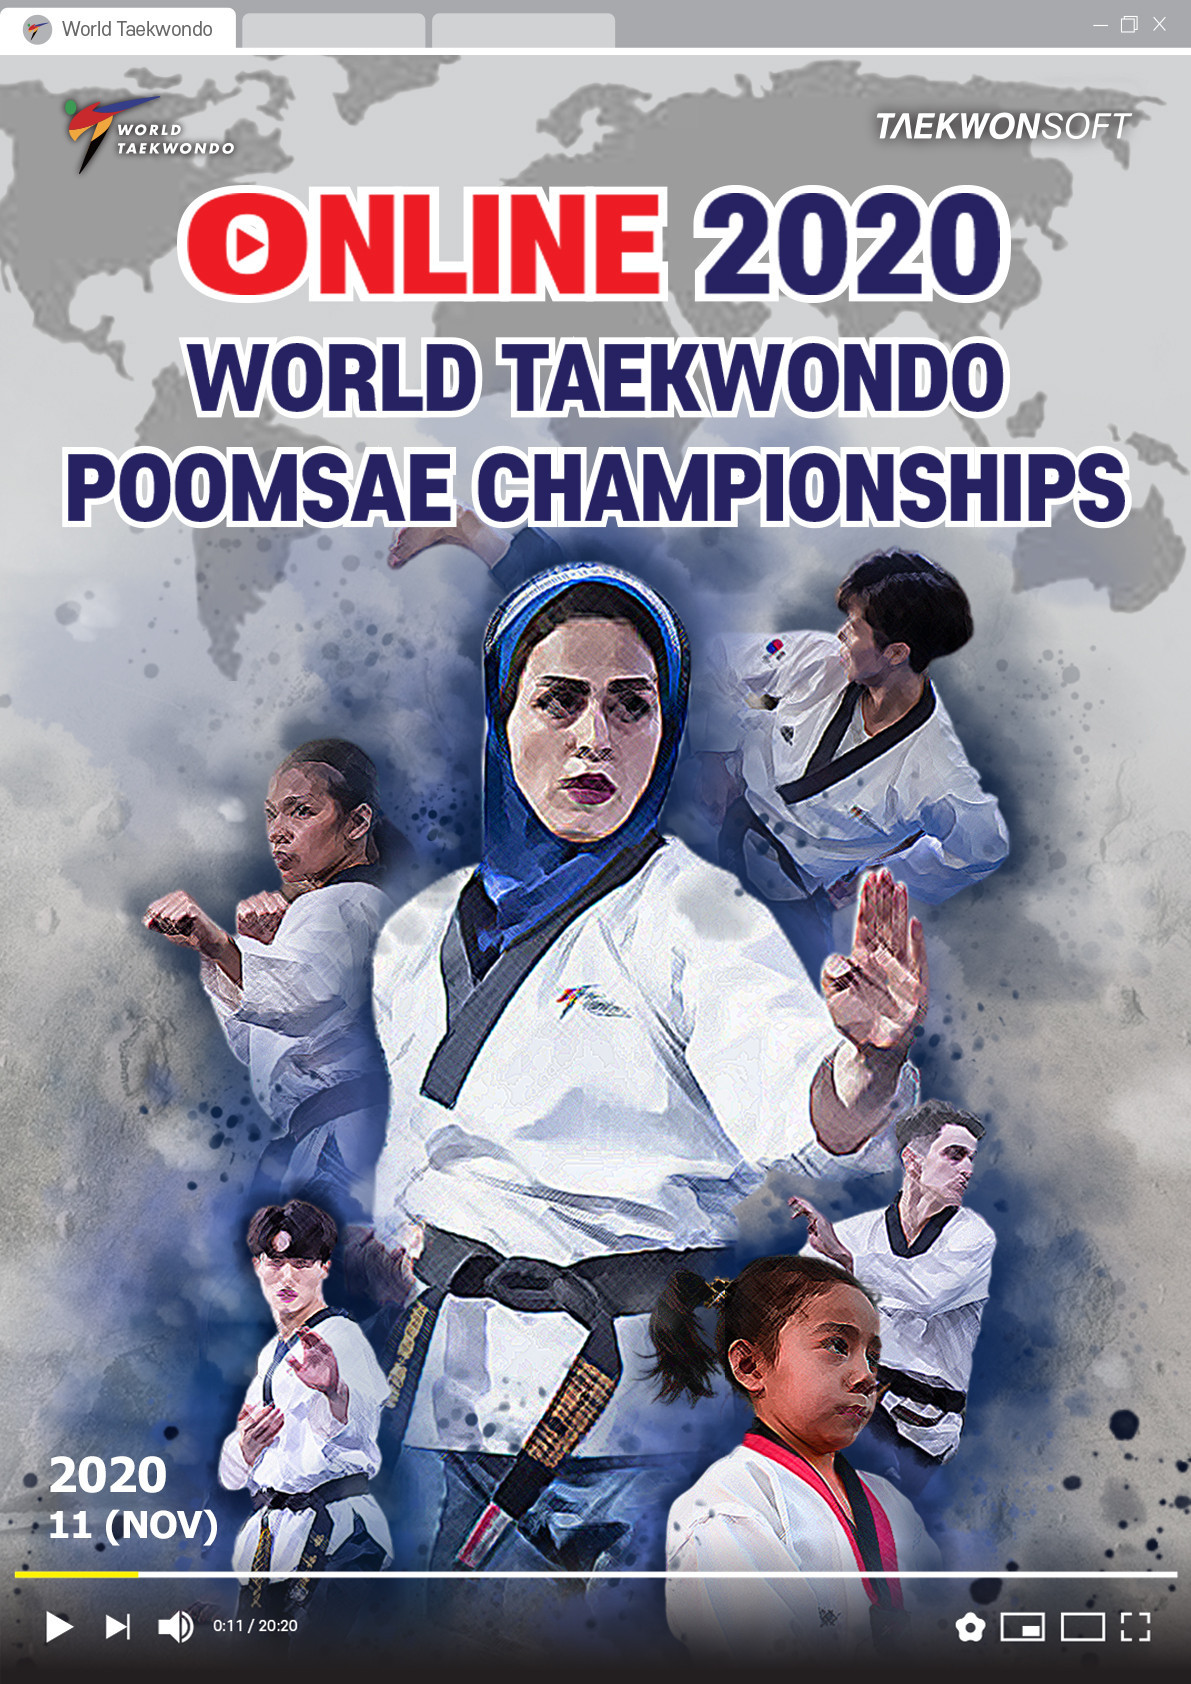 Inaugural Online World Taekwondo Poomsae Championships to be "open to all" from November 15